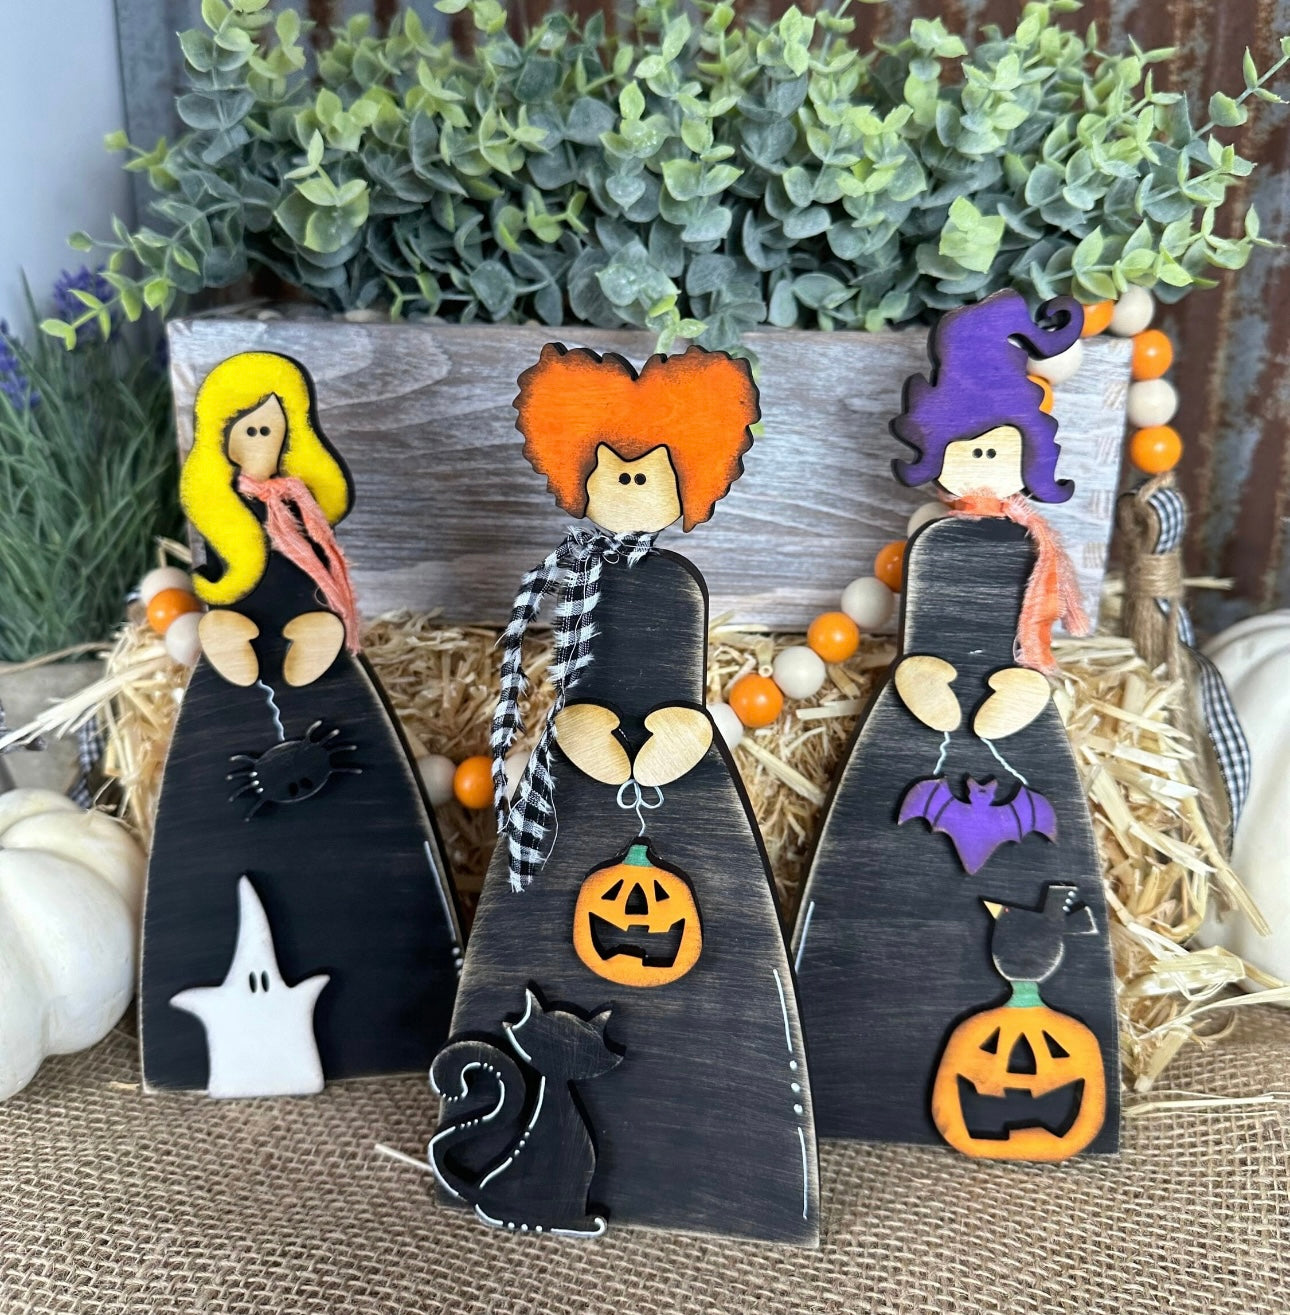 3 Witches Workshop- 9/29/23 @ 6:00pm